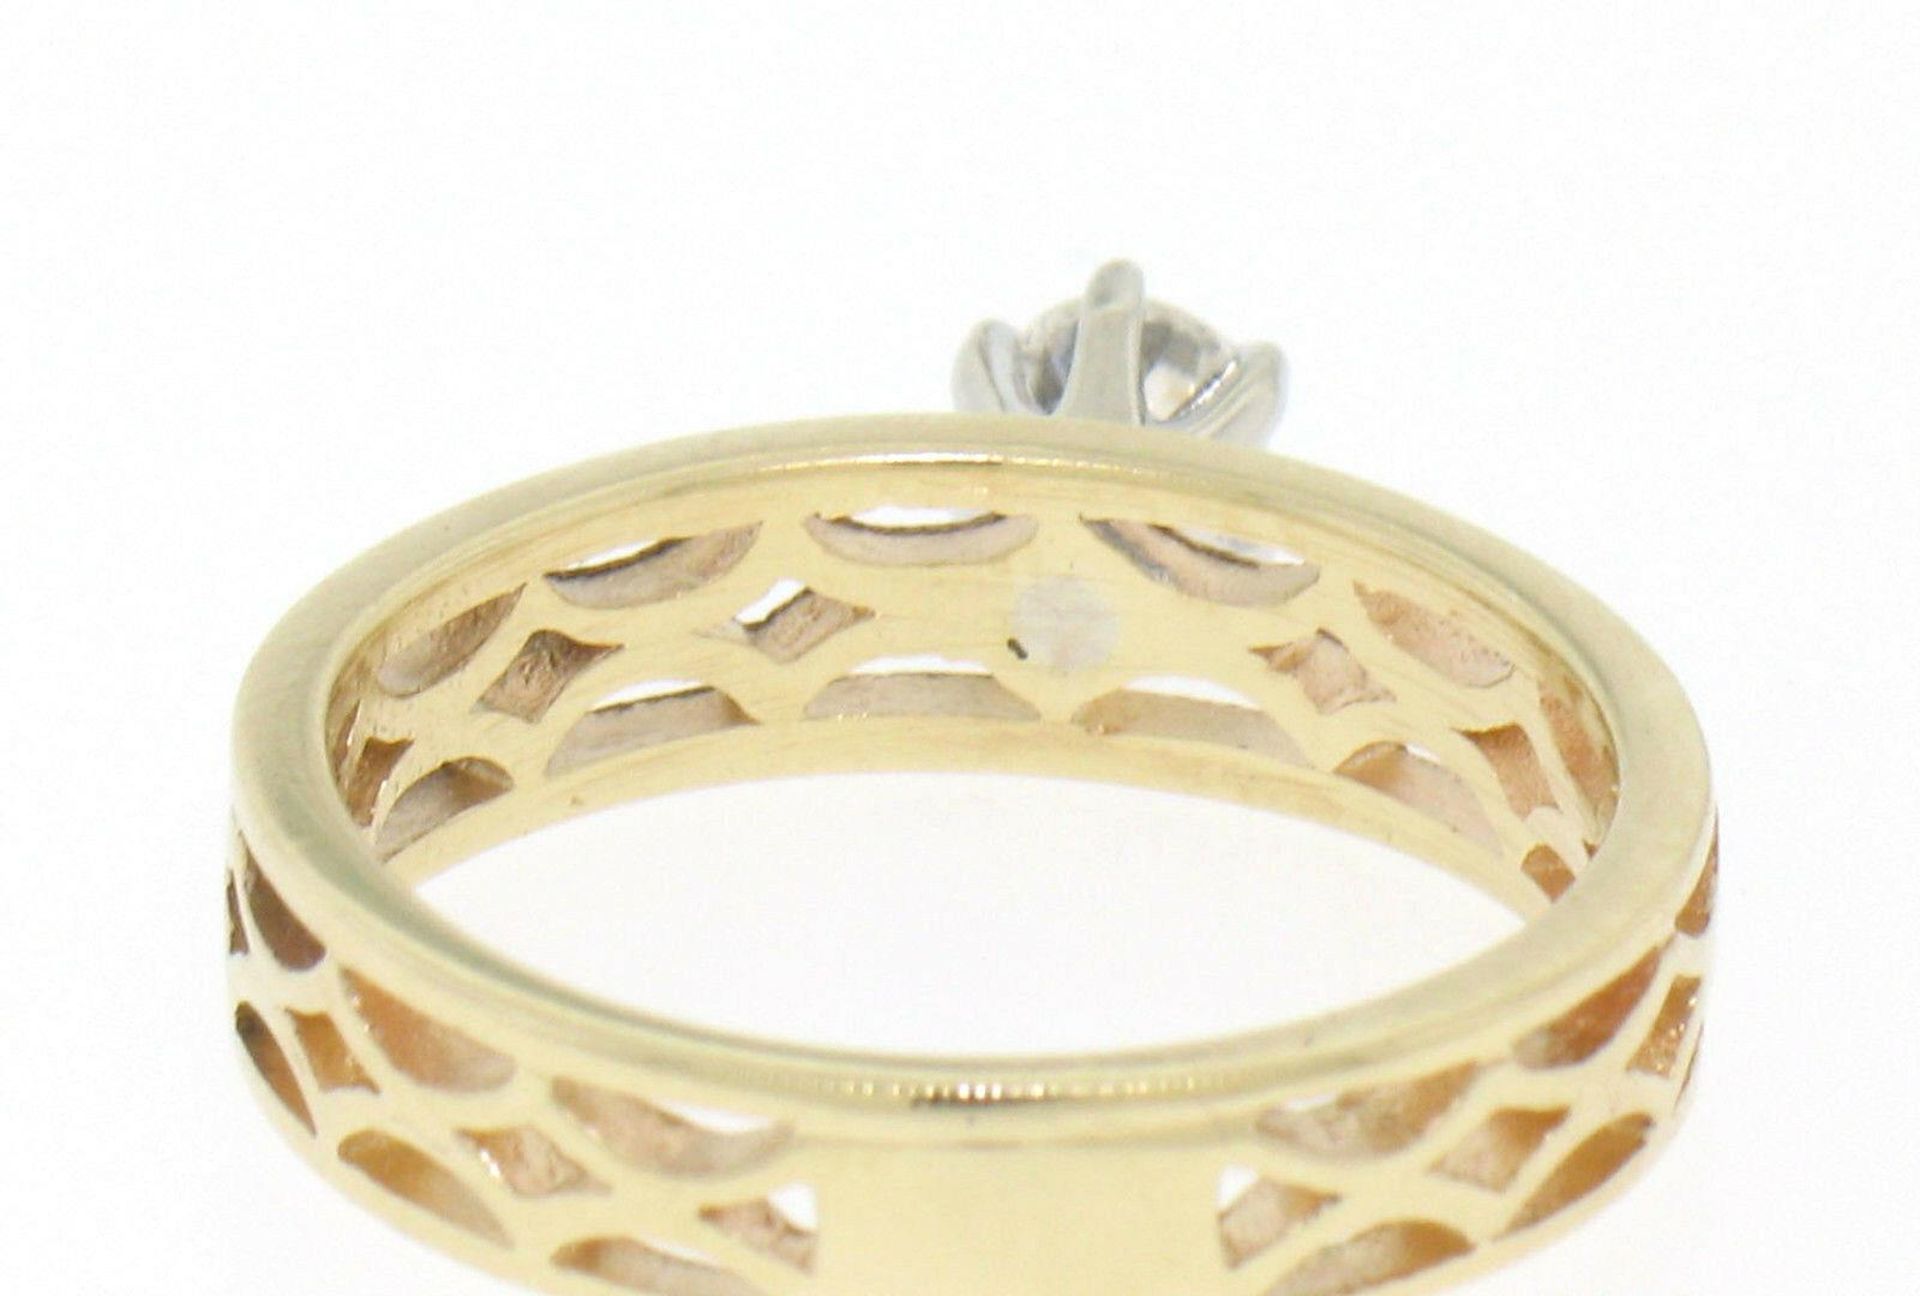 Estate 14k Solid Yellow Gold Solitaire Diamond Ring with Pierced Open Work Look - Image 5 of 5